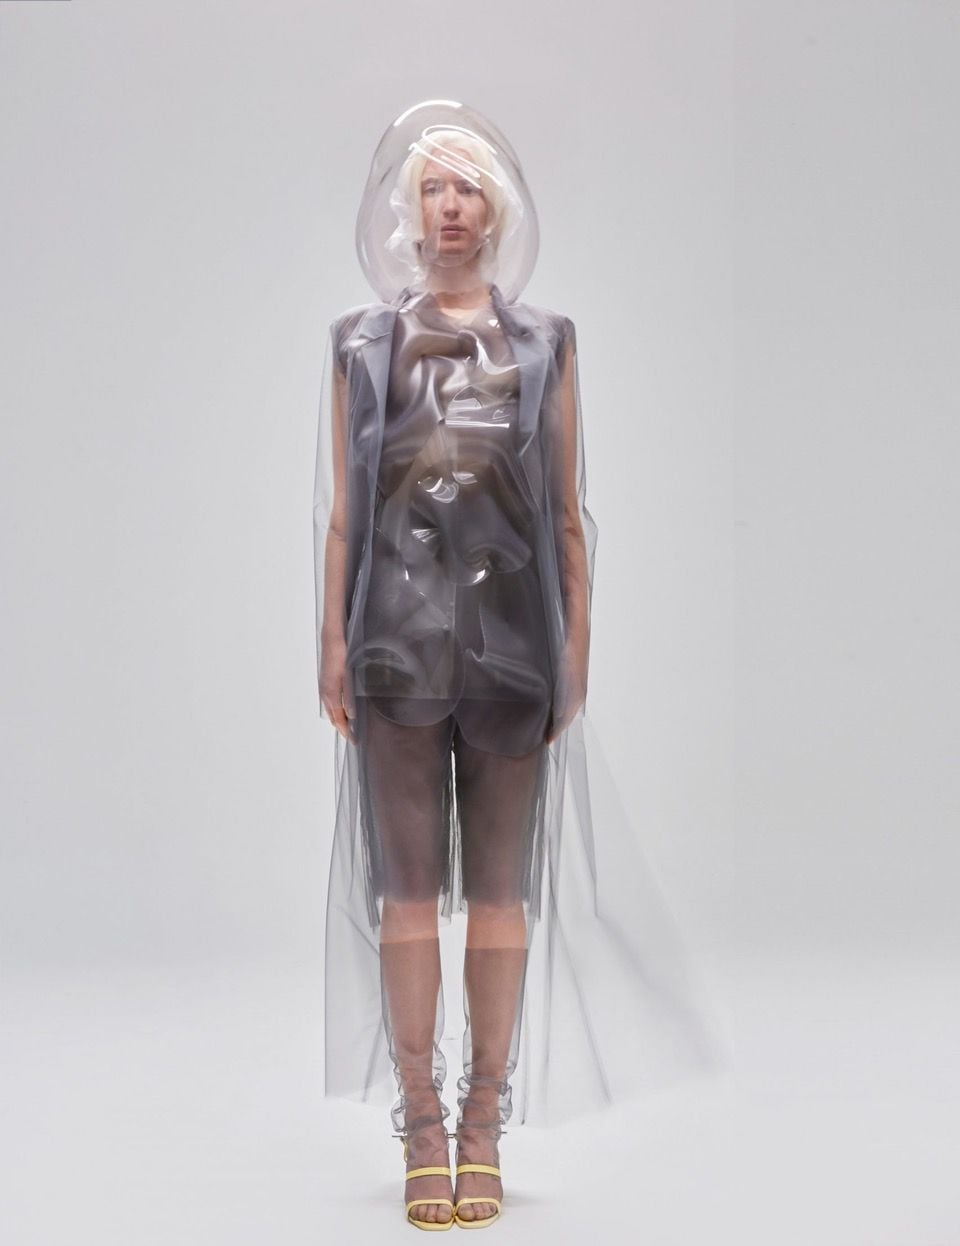 Translucent robotic garment featured in Ying Gao's 